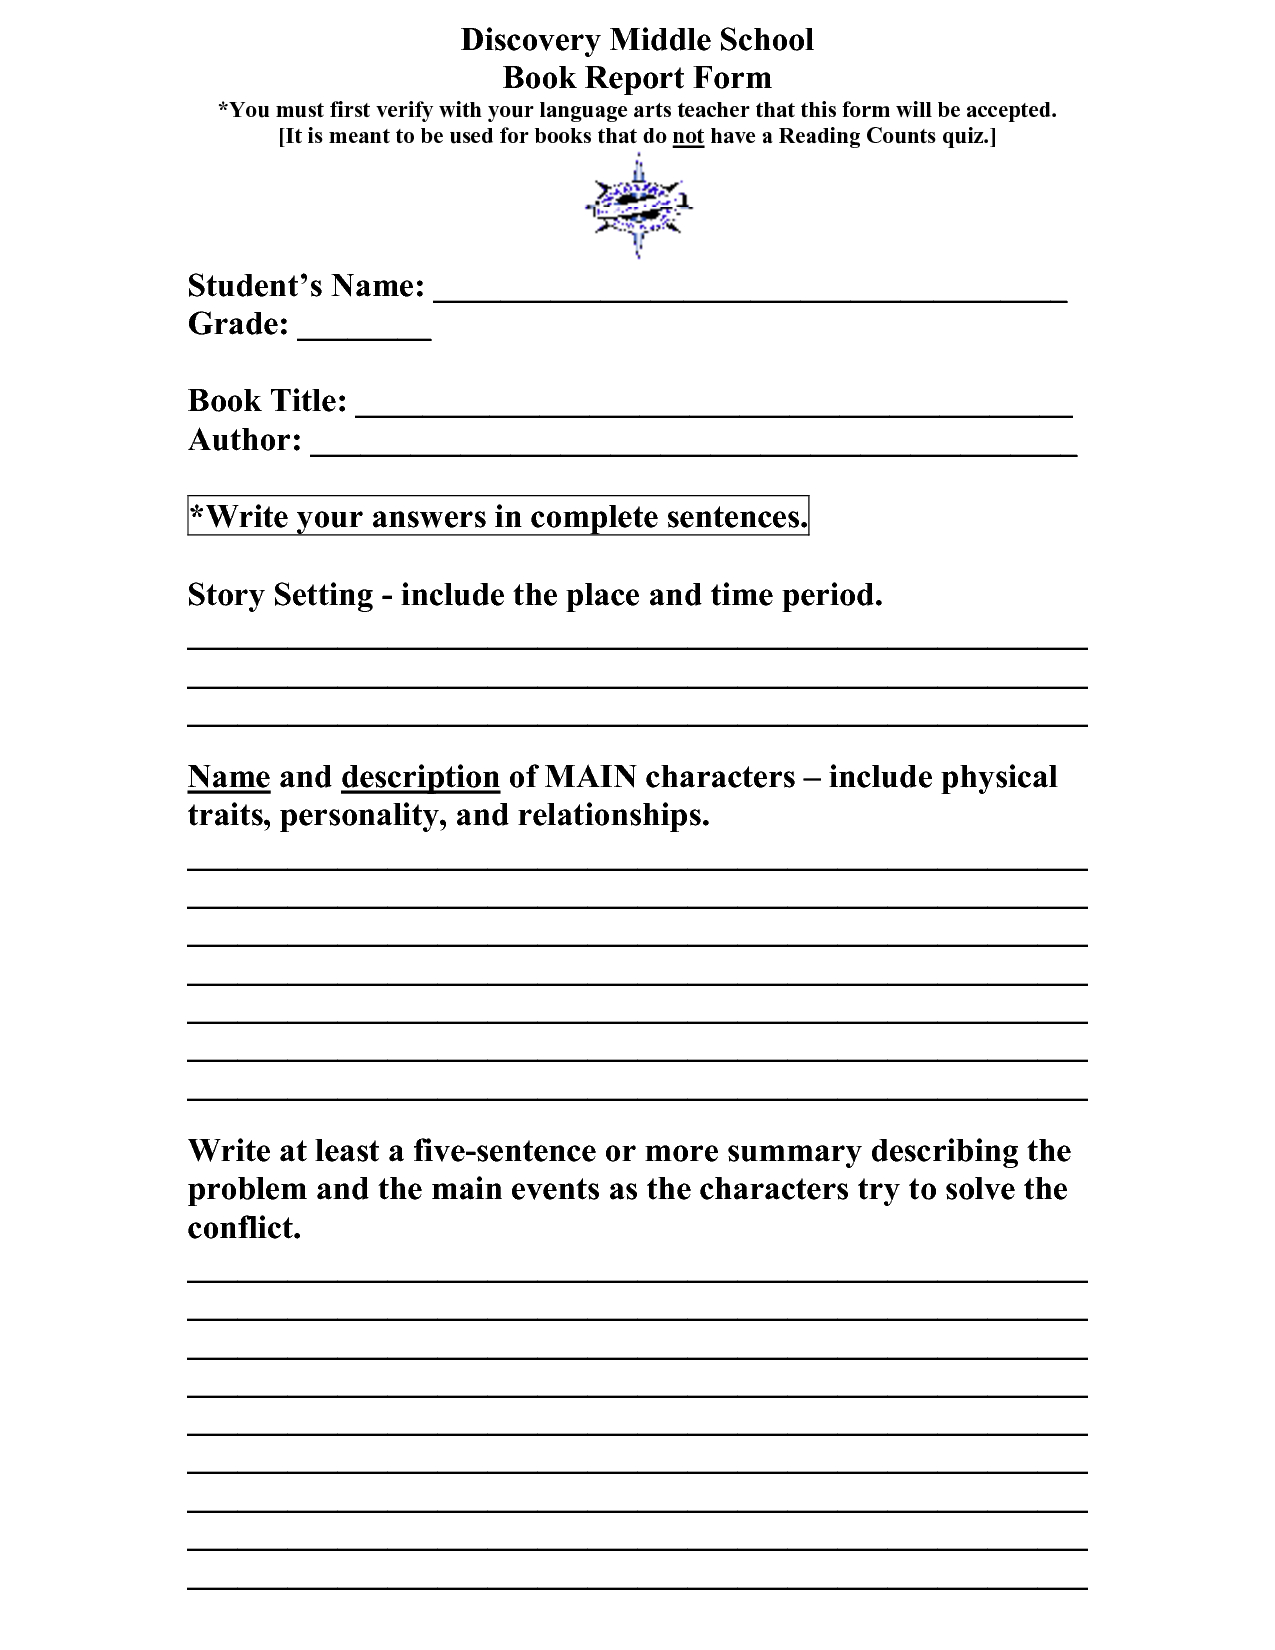 free-printable-book-report-forms-for-elementary-students-free